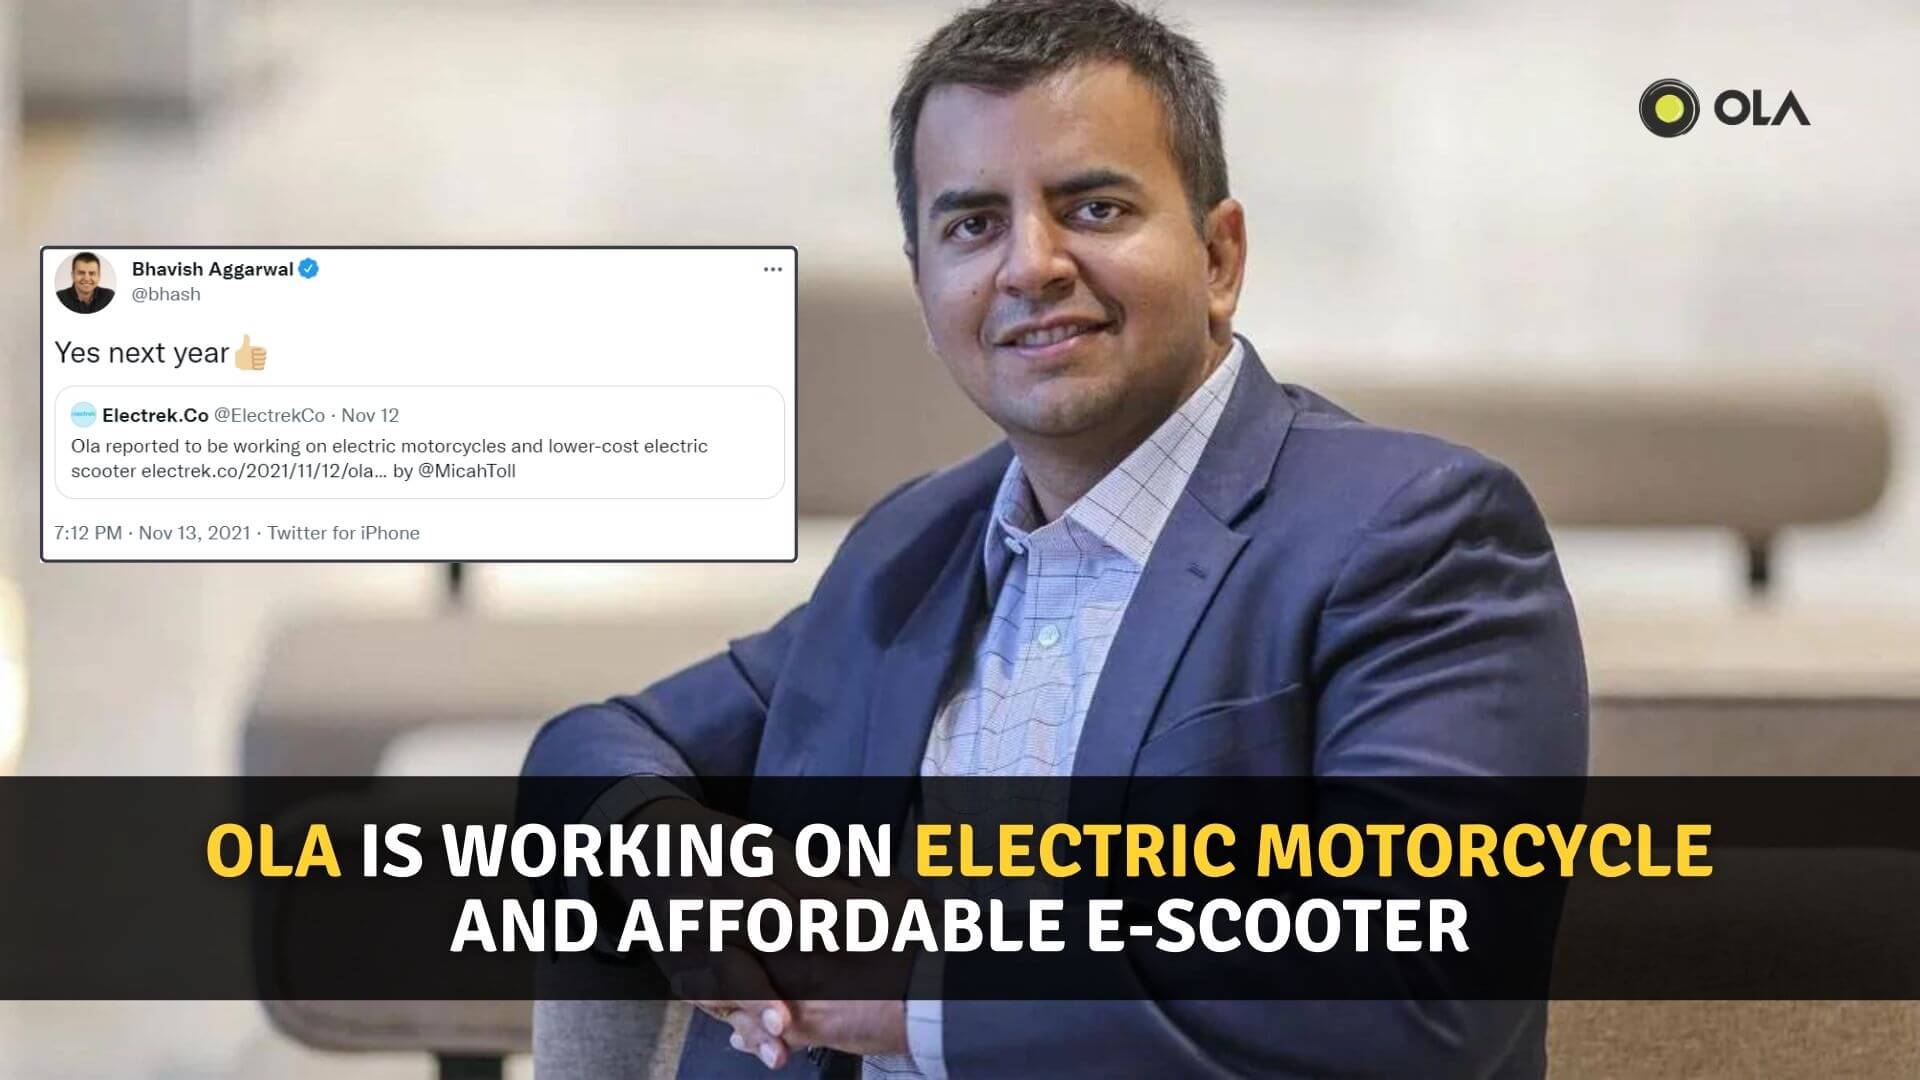 https://e-vehicleinfo.com/ola-electric-motorcycle-and-affordable-electric-scooter/